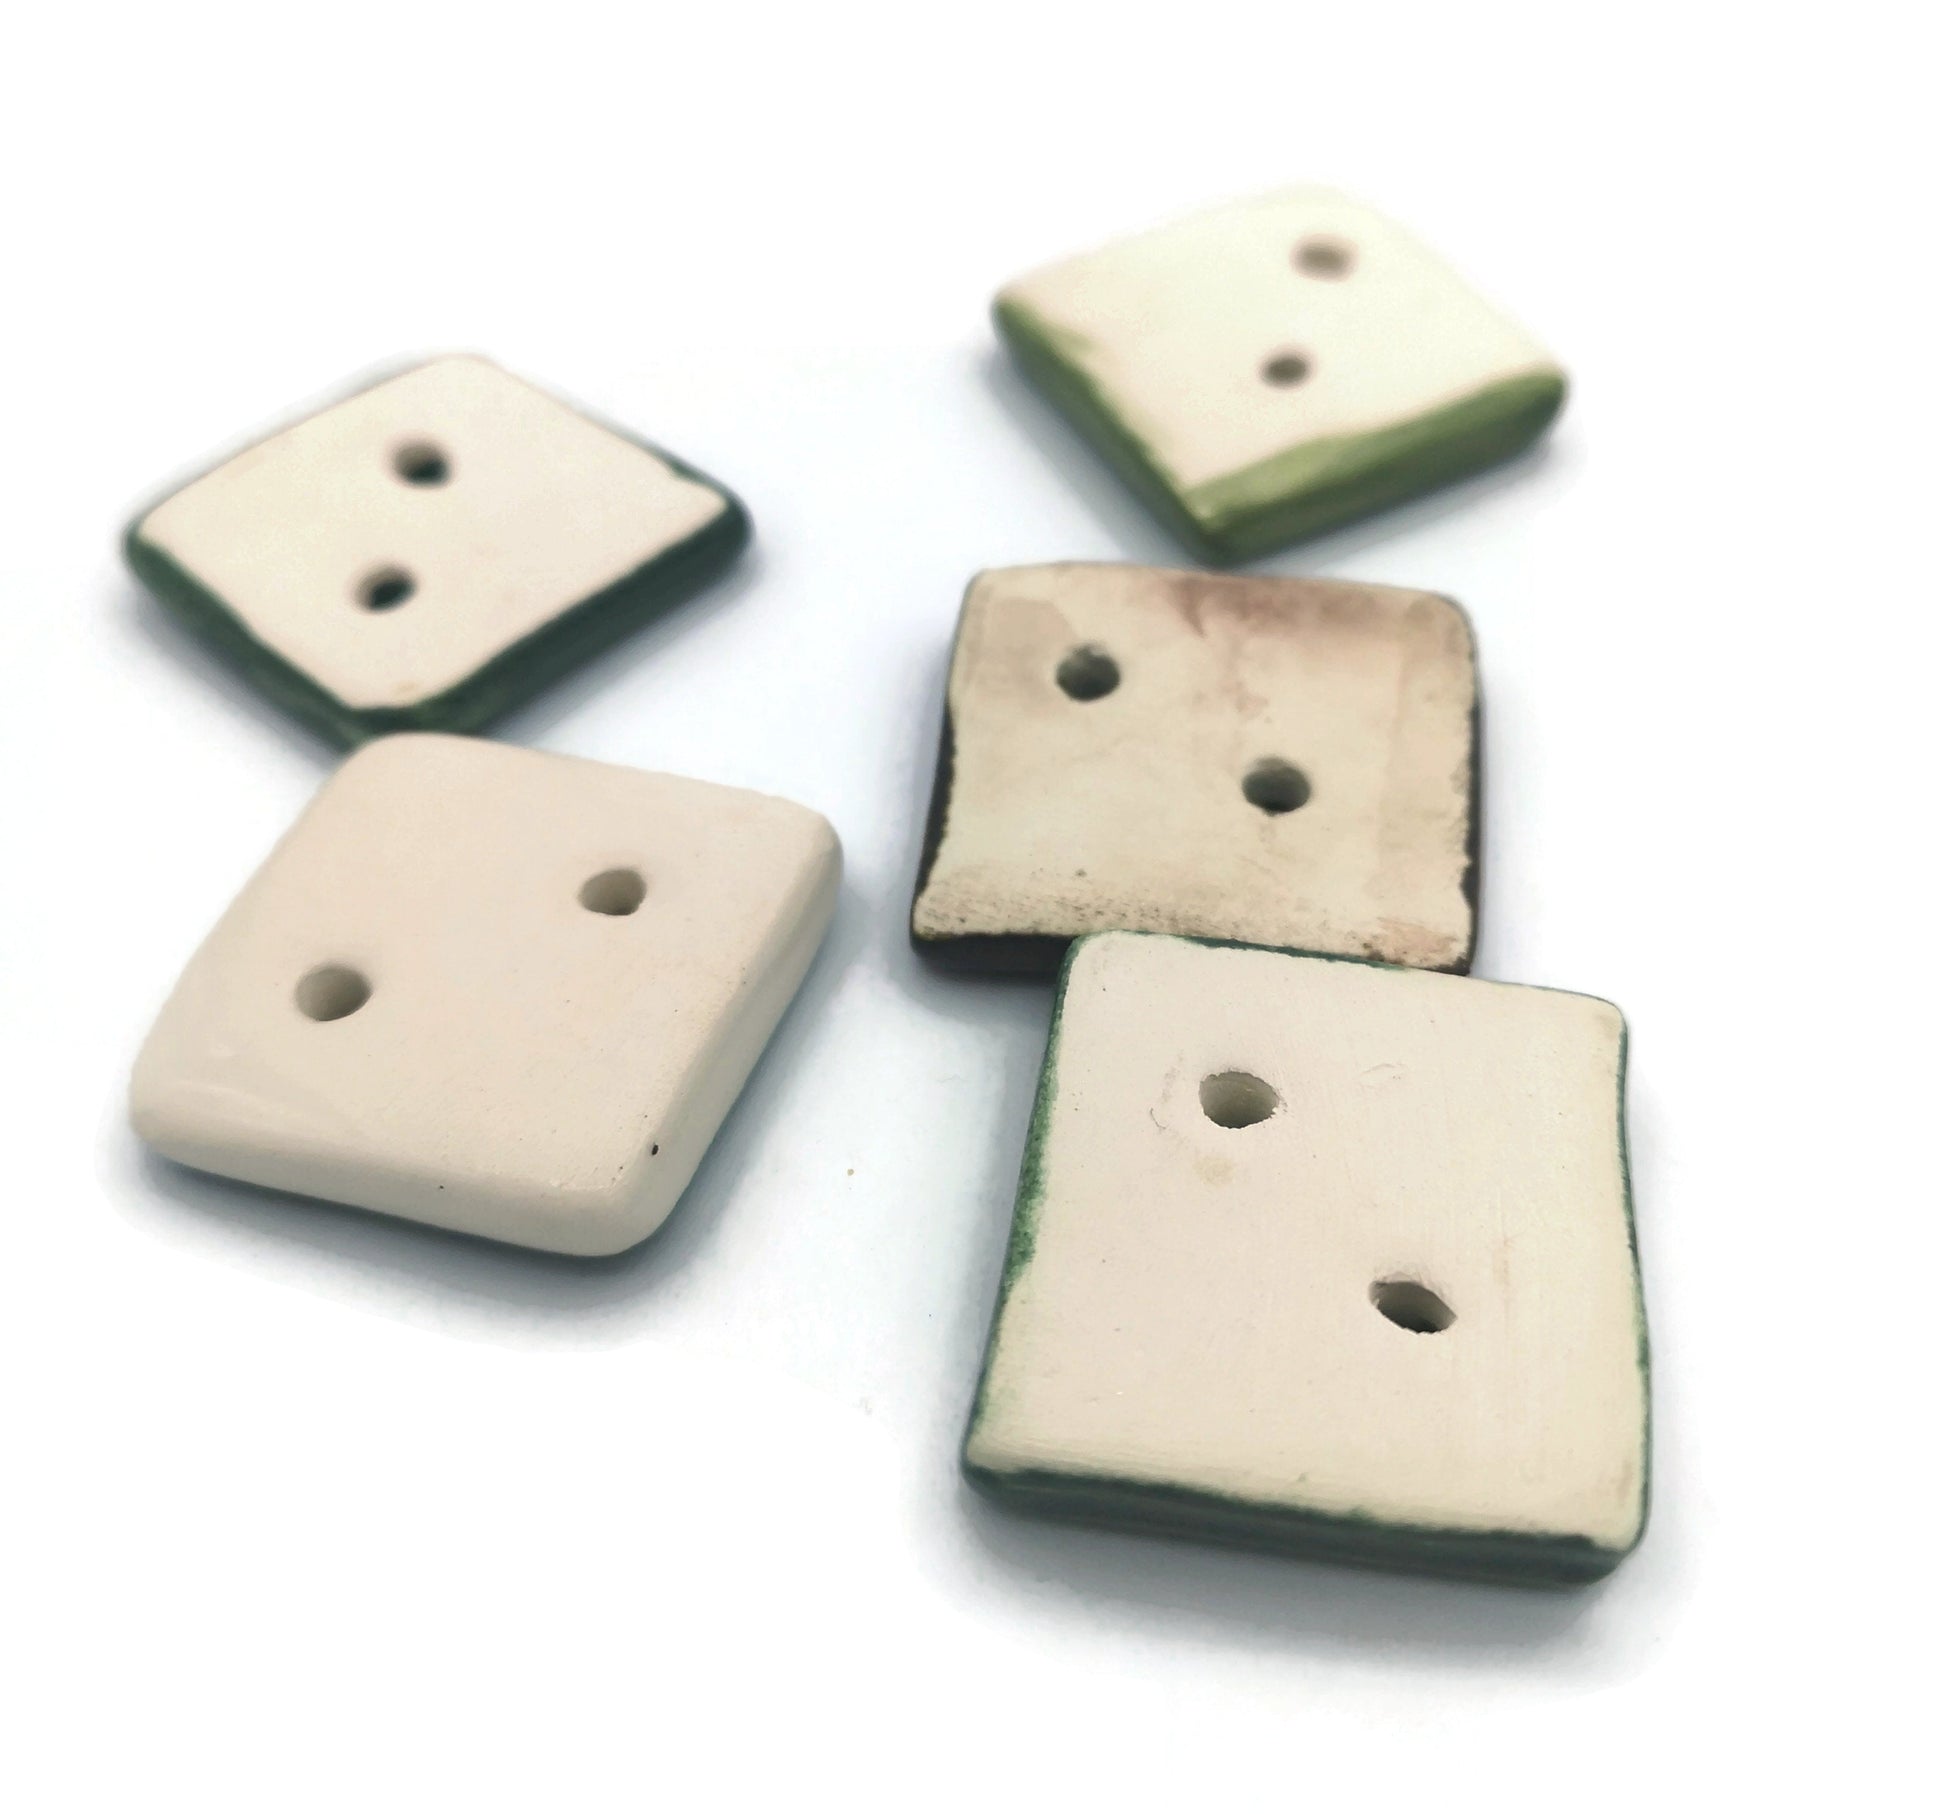 5Pc 30mm Handmade Ceramic Square Sewing Buttons For Crafts, 2 Hole Hand Painted Coat Buttons, Flat Back Button Lot, Blouse Buttons Flatback - Ceramica Ana Rafael